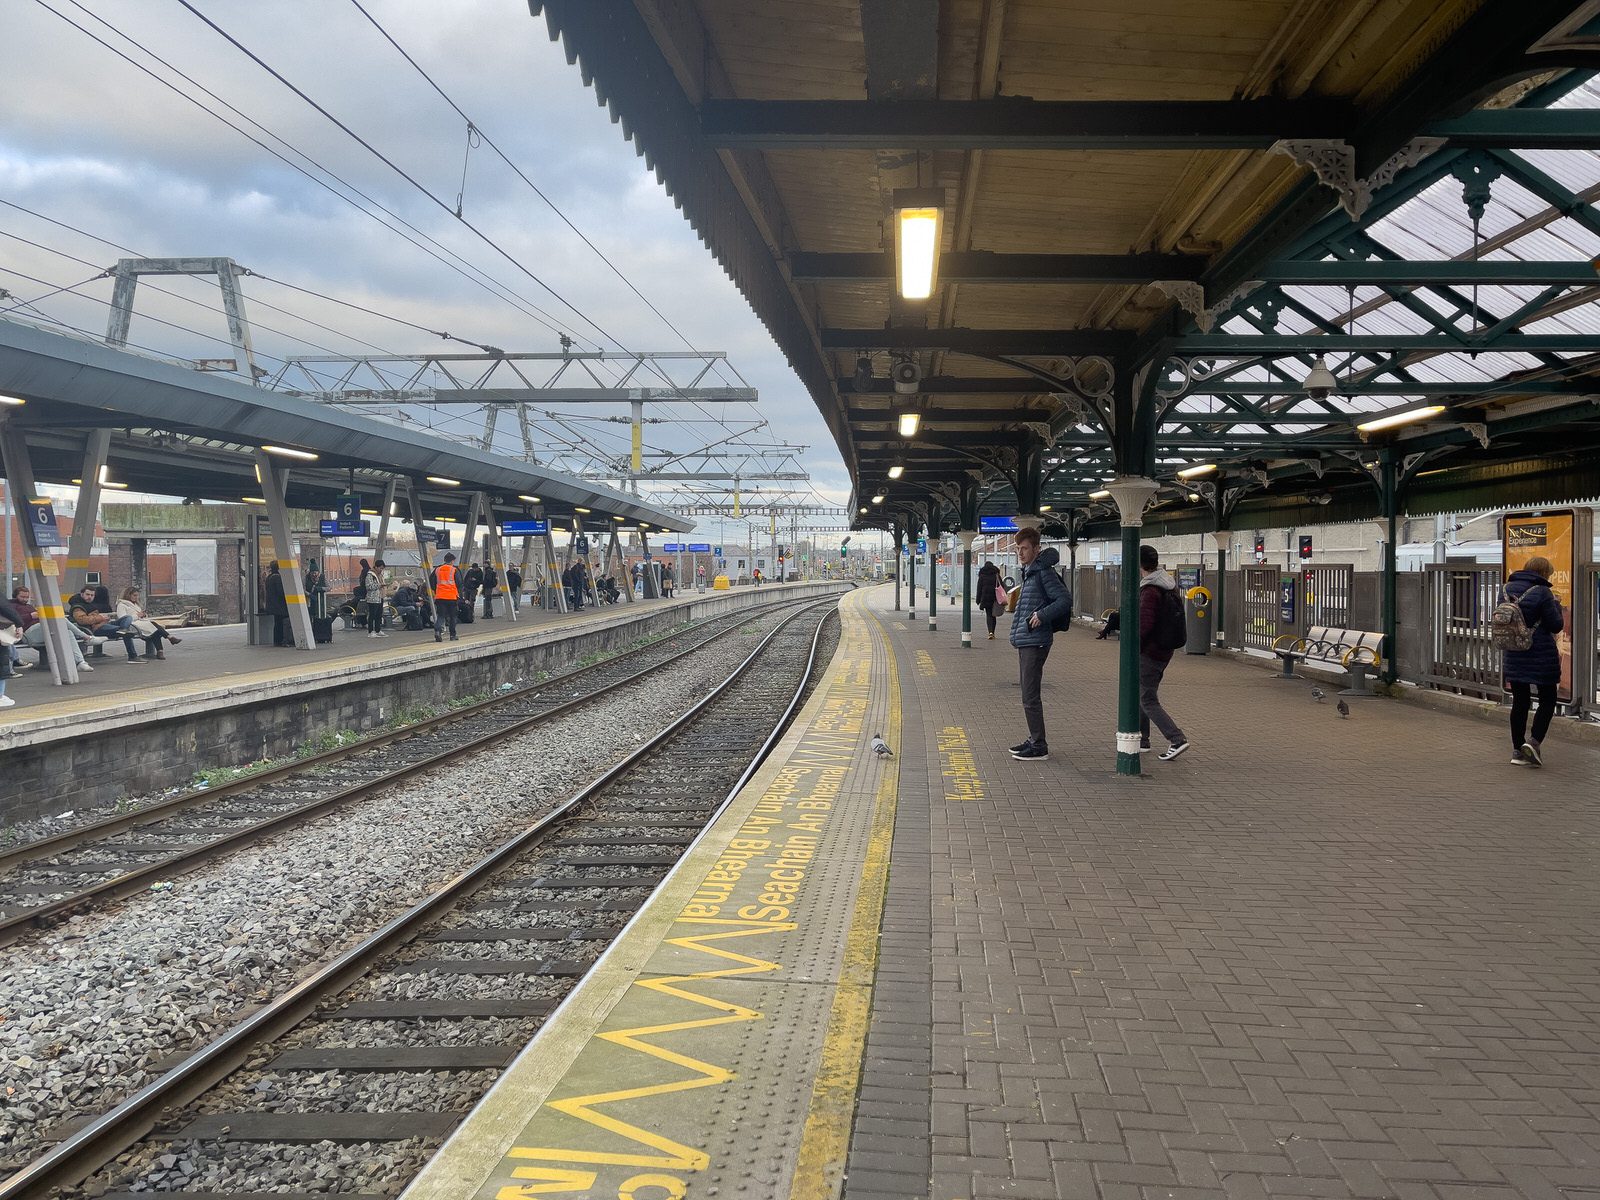 AS THE BUS AND TRAM SERVICES WERE SUSPENDED IN THE CITY CENTRE [I WENT TO CONNOLLY STATION AND TRAVELLED BY DART]-225400-1